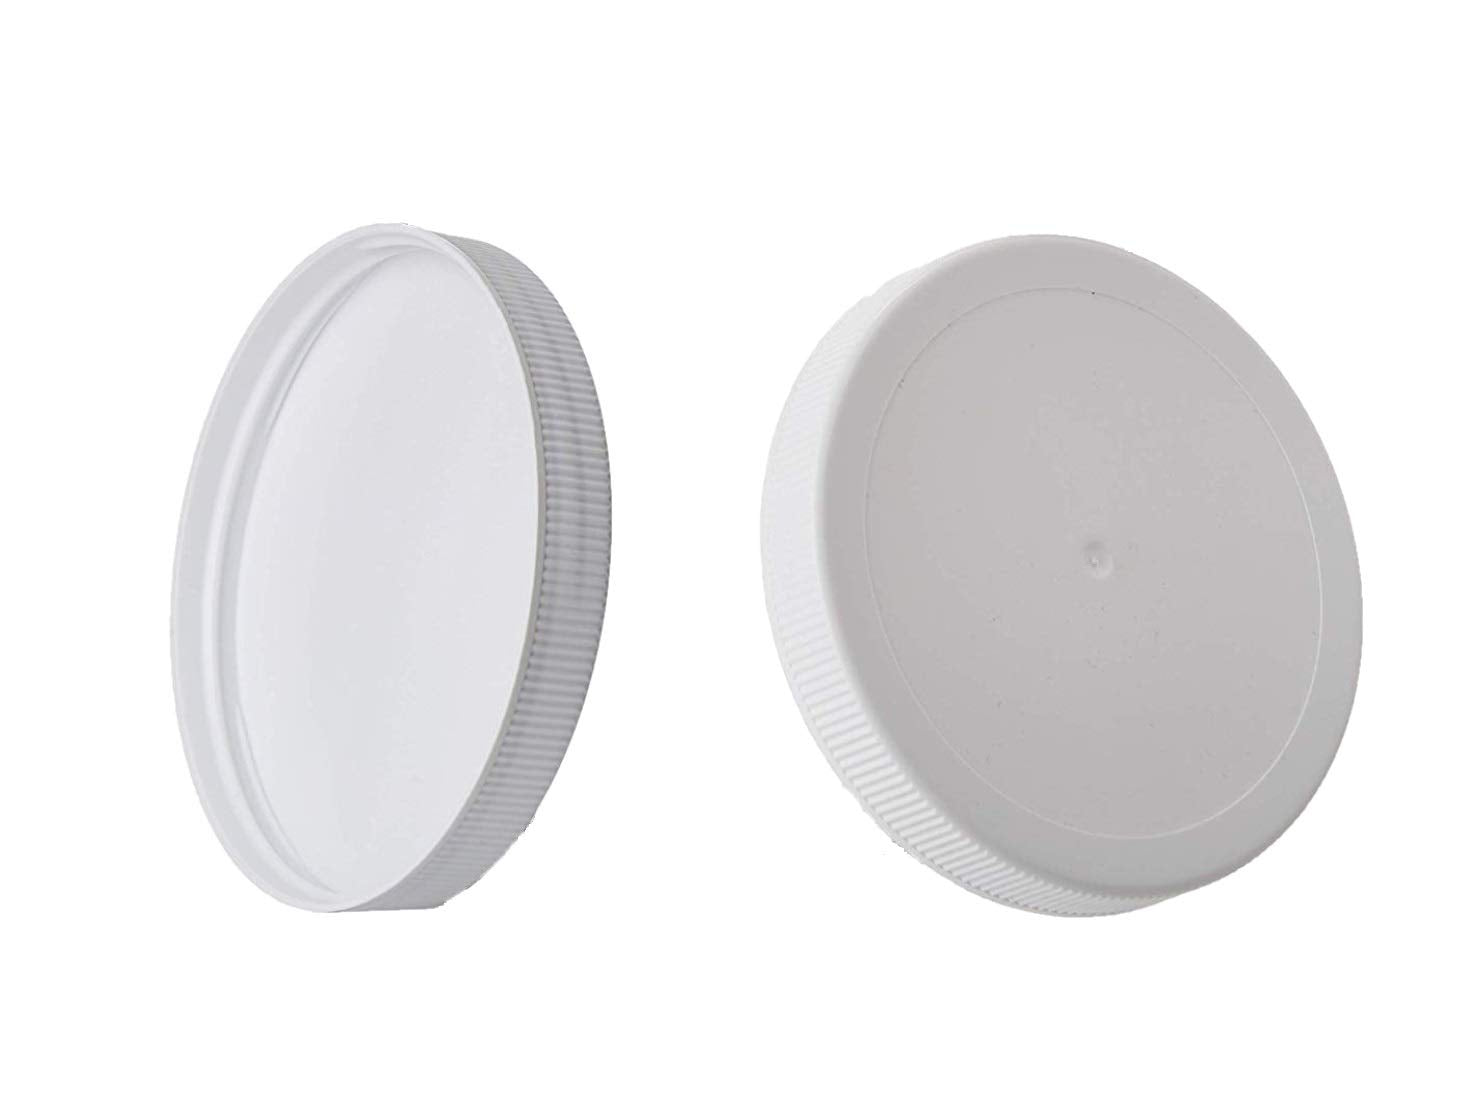 Kitchentoolz White Plastic Lids for 1 Gallon Wide Mouth Glass Jars - fits 110mm opening (110-400) - Caps Lined with PE Foam Food Grade (jars not included)  - Like New